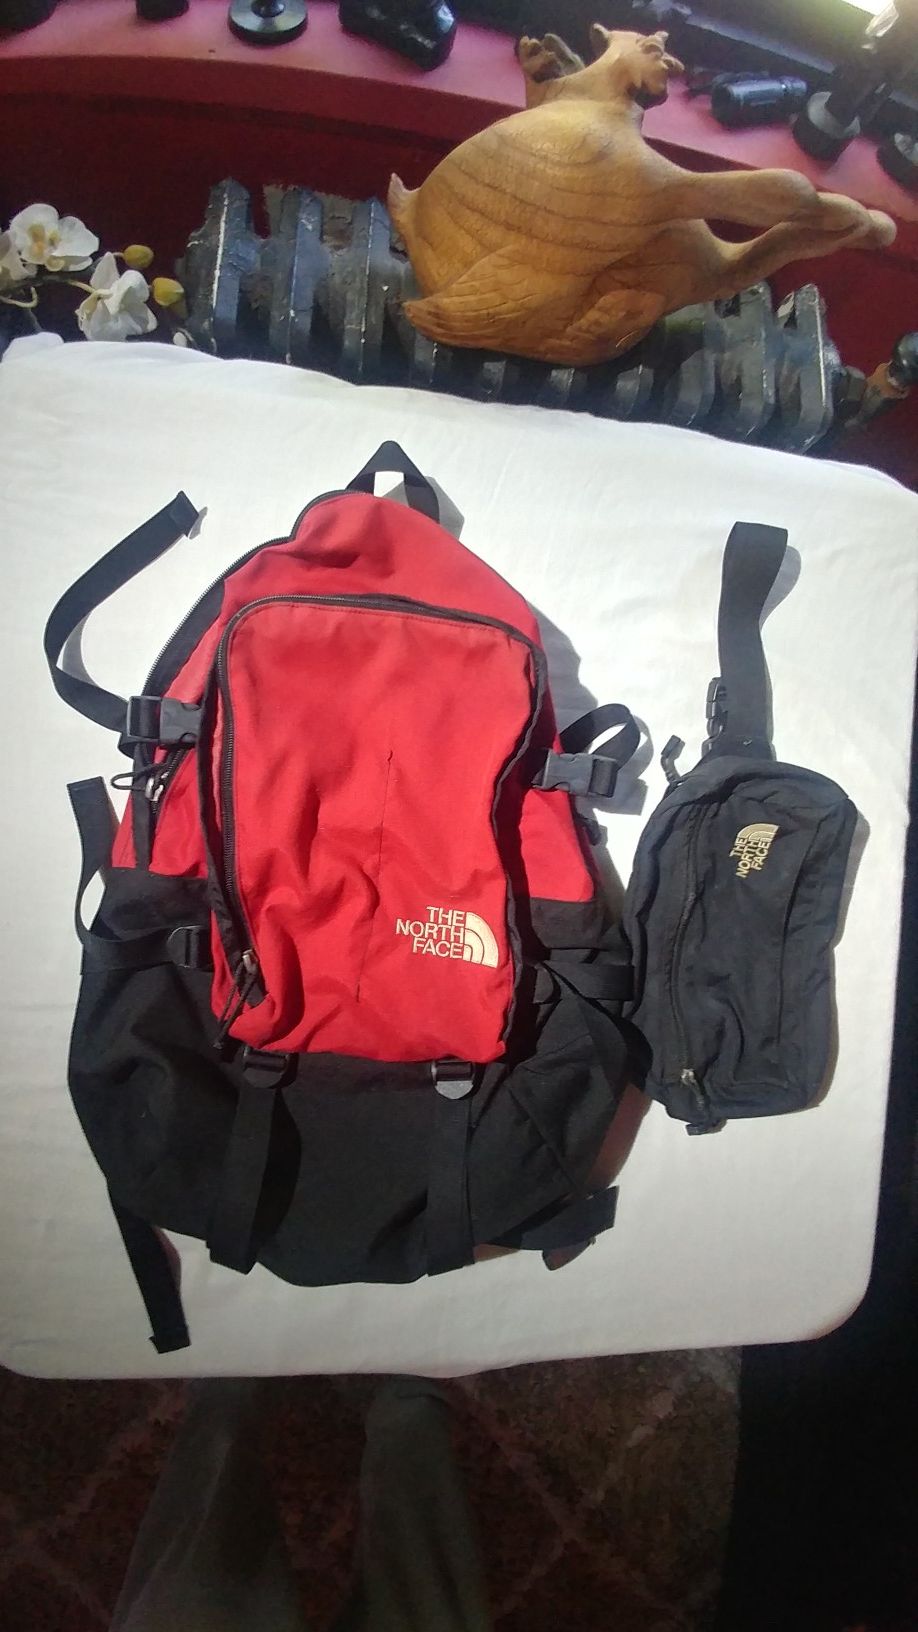 North Face backpack .. north face fanny pack